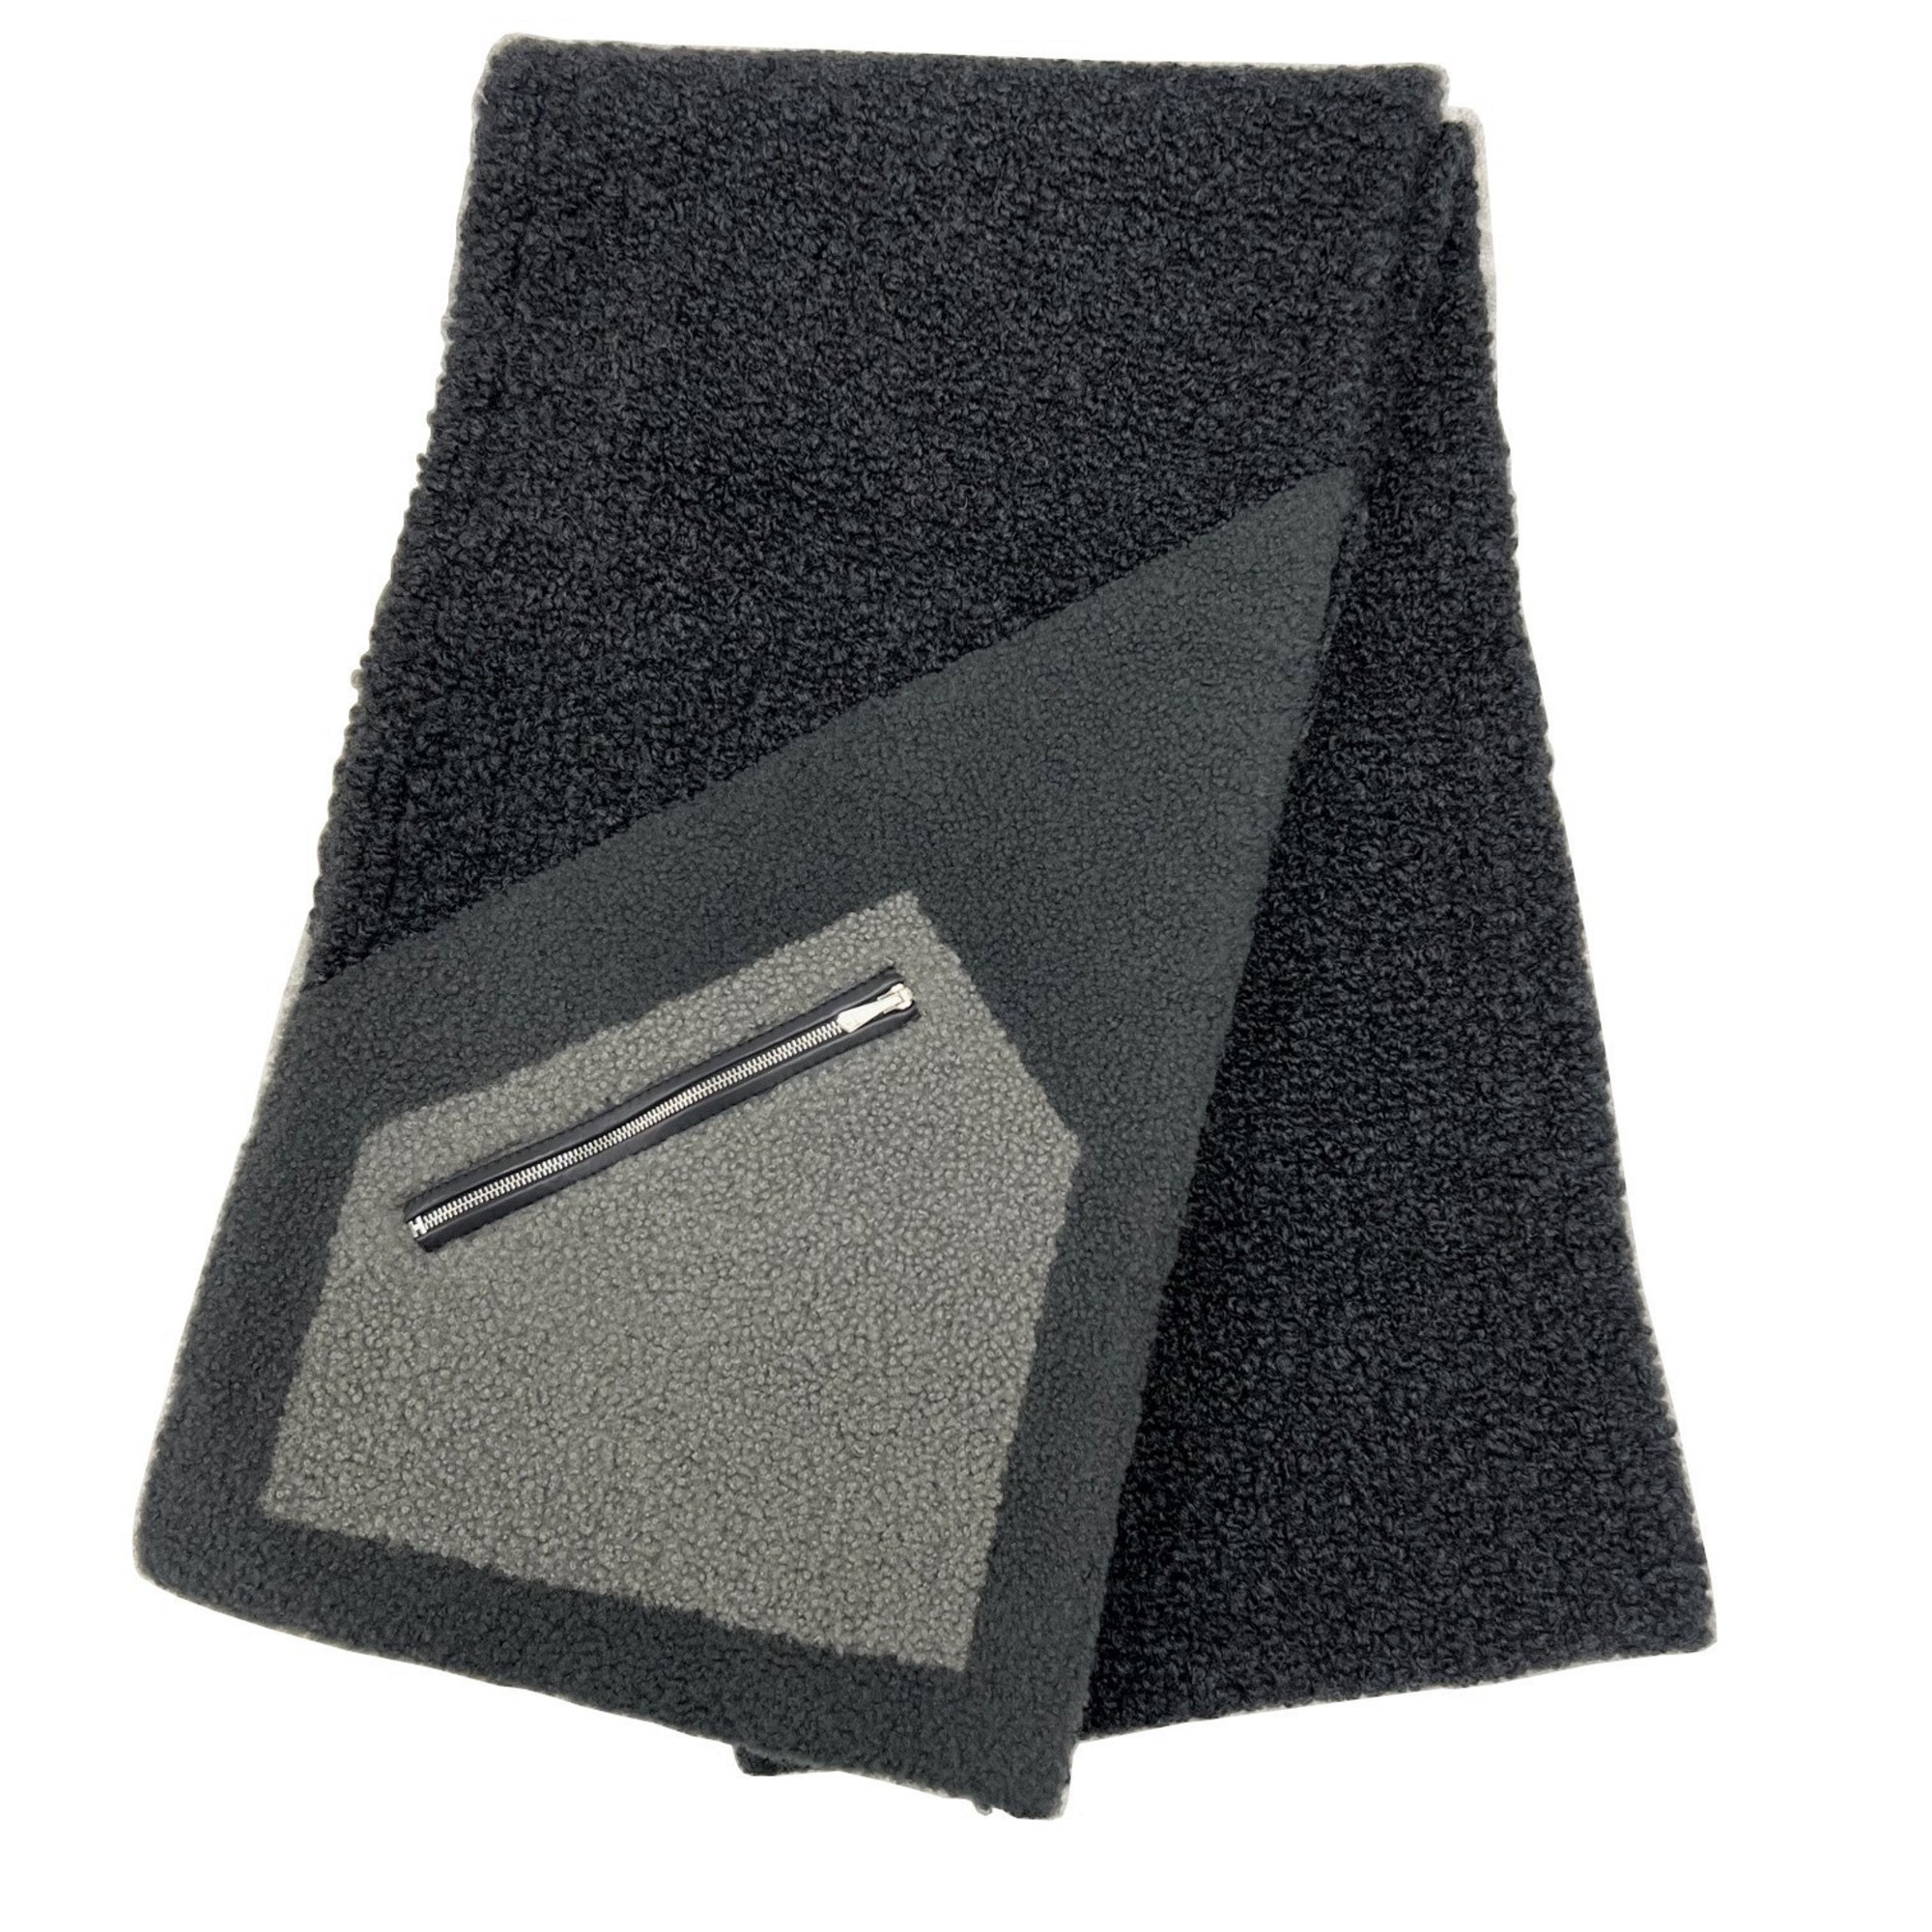 HERMES Hermes Muffler Double Booklet 22AW Cashmere Silk Anthracite Conifere Dark Gray Khaki Men's New Current